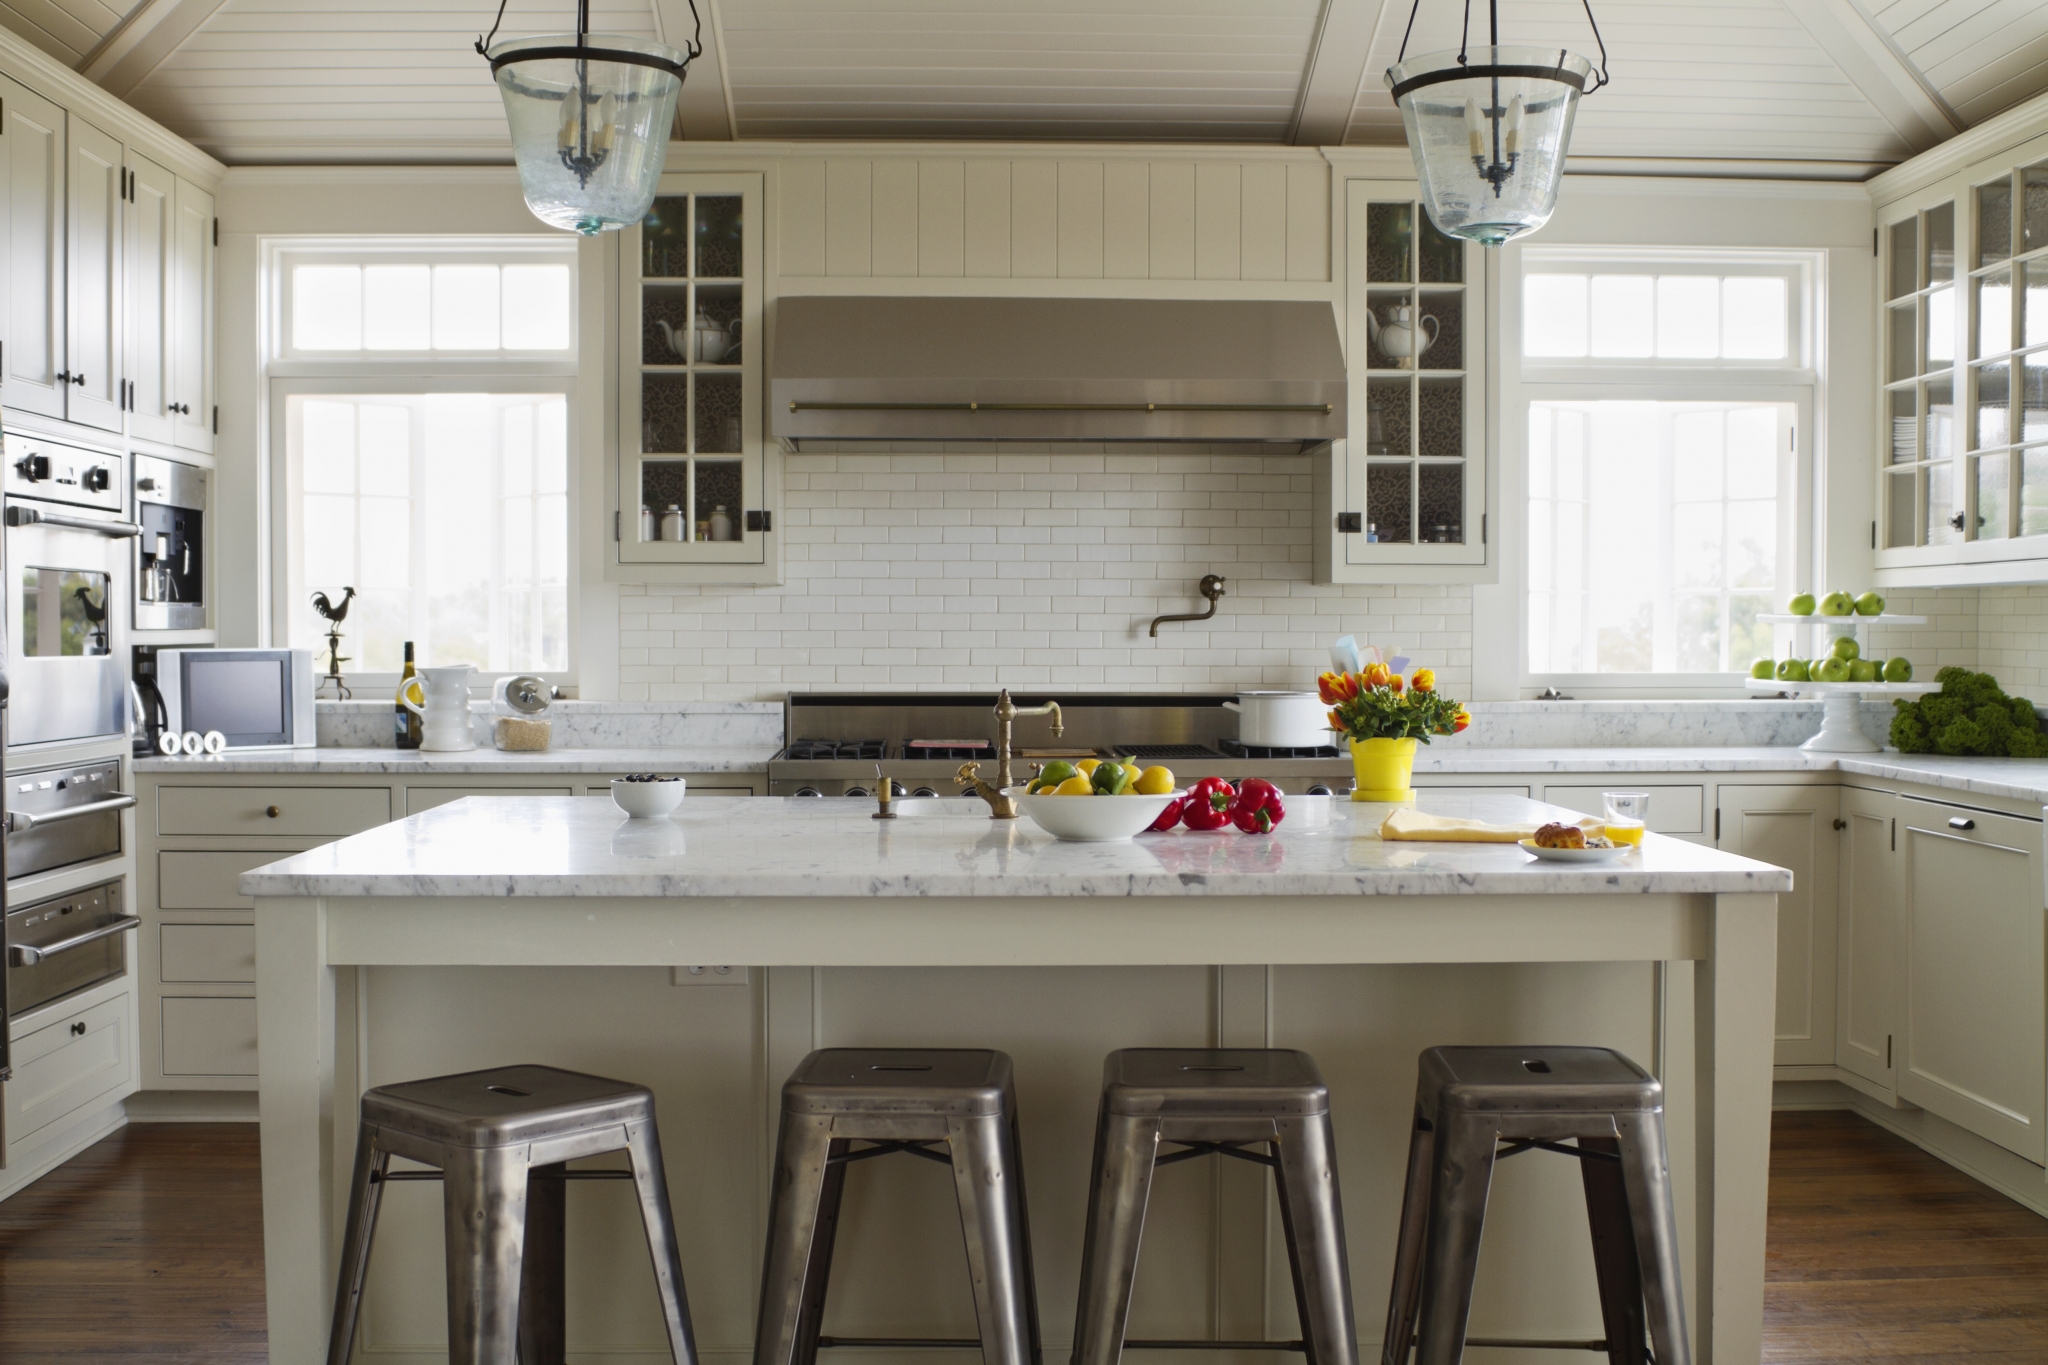 How to have open shelving in your kitchen (without daily staging